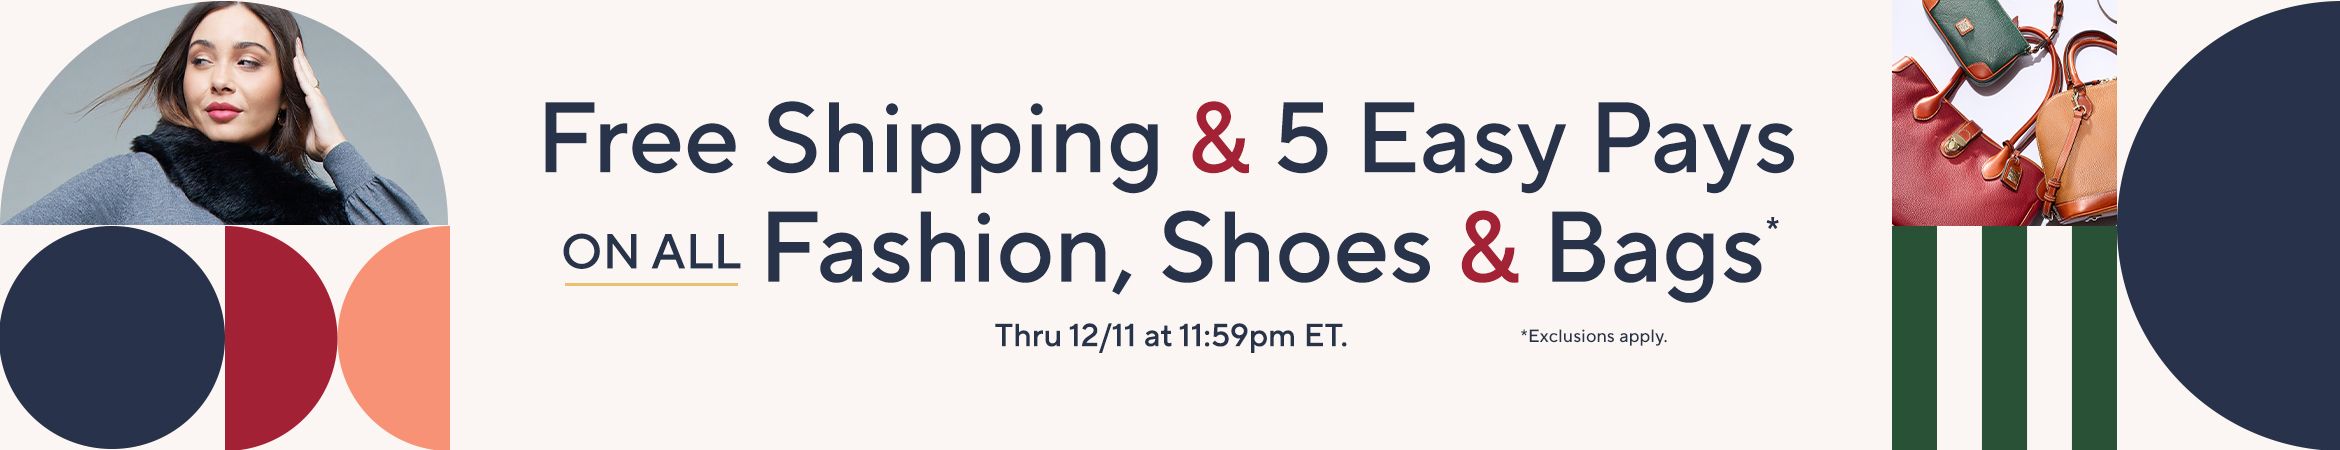 Free Shipping & 5 Easy Pays on All Fashion, Shoes & Bags* Thru 12/11 at 11:59pm ET. *Exclusions apply.